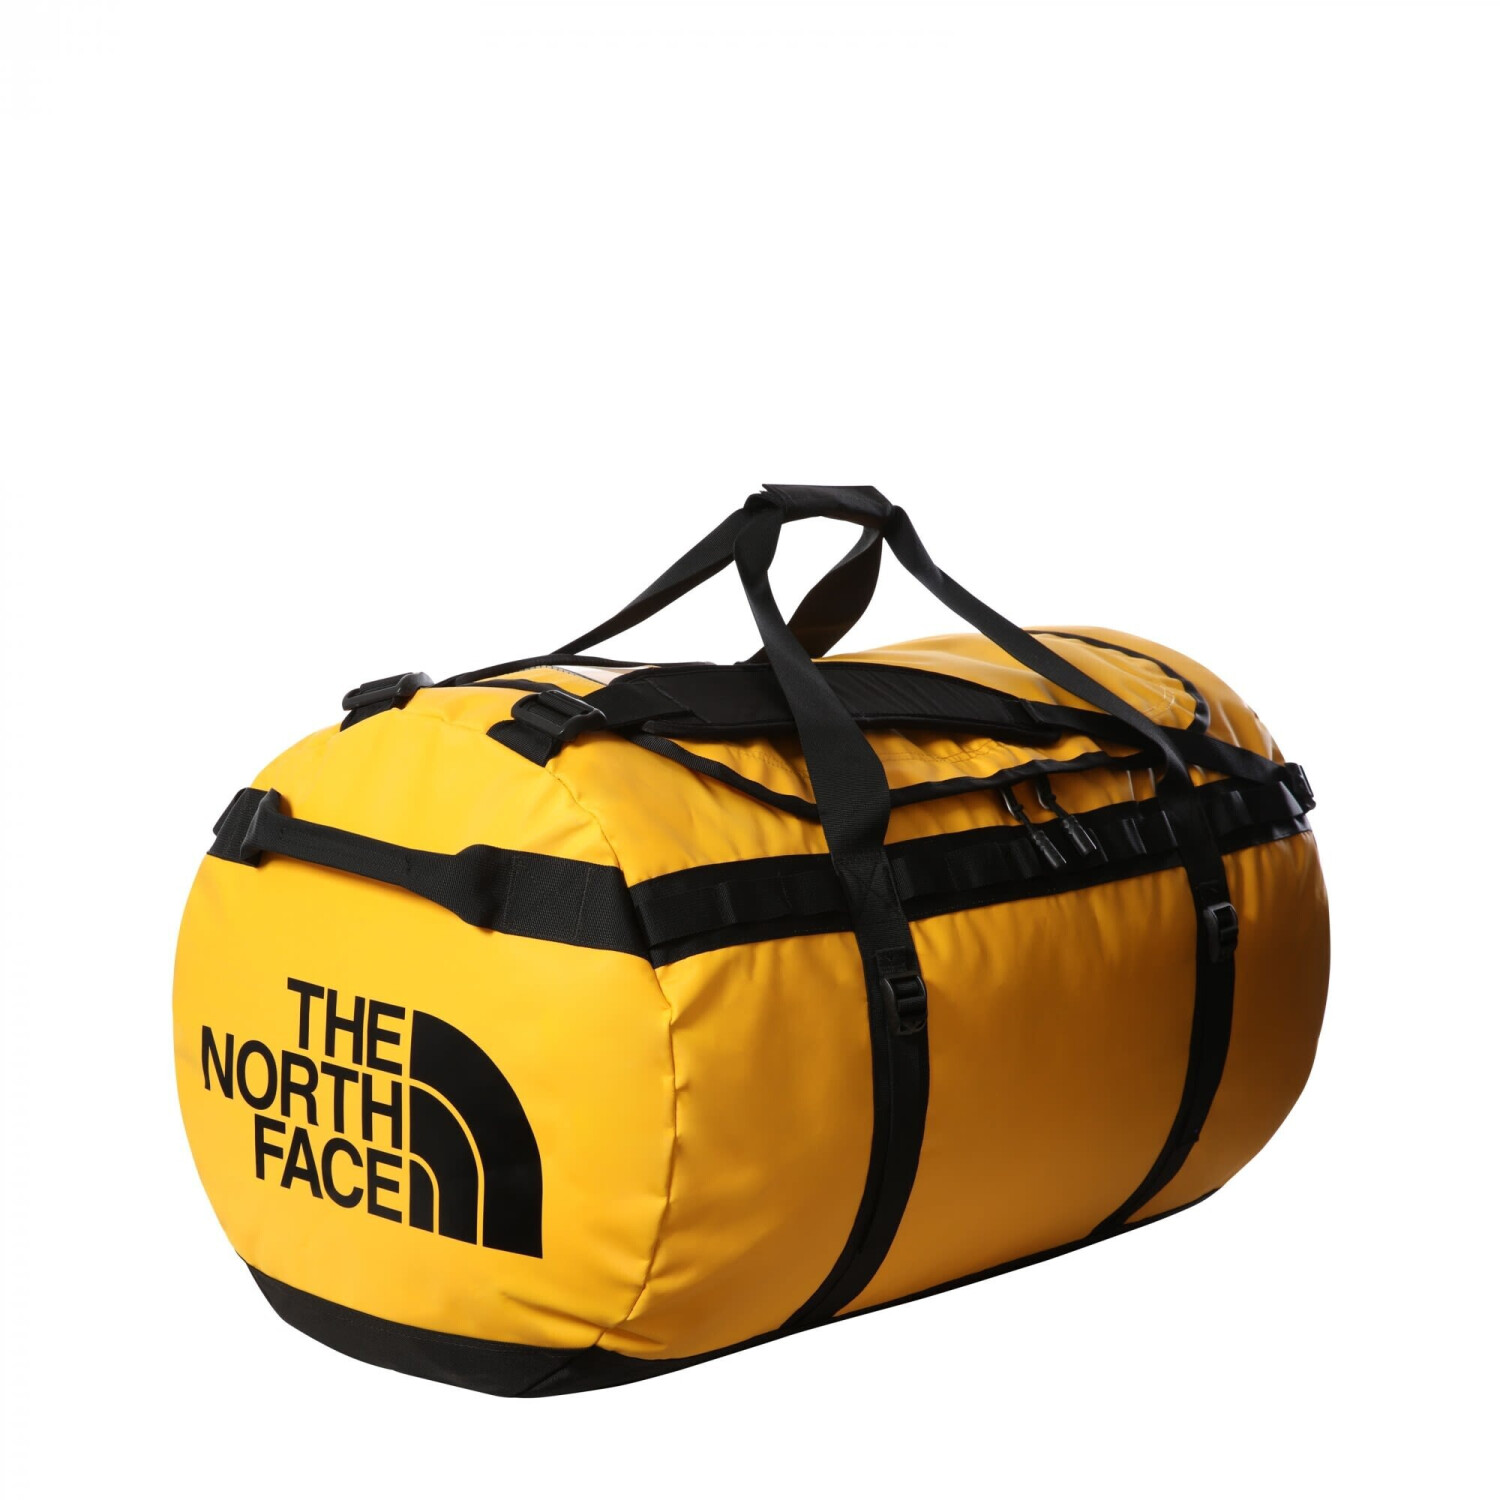 Buy The North Face Base Camp Duffel XL (52SC) from £122.00